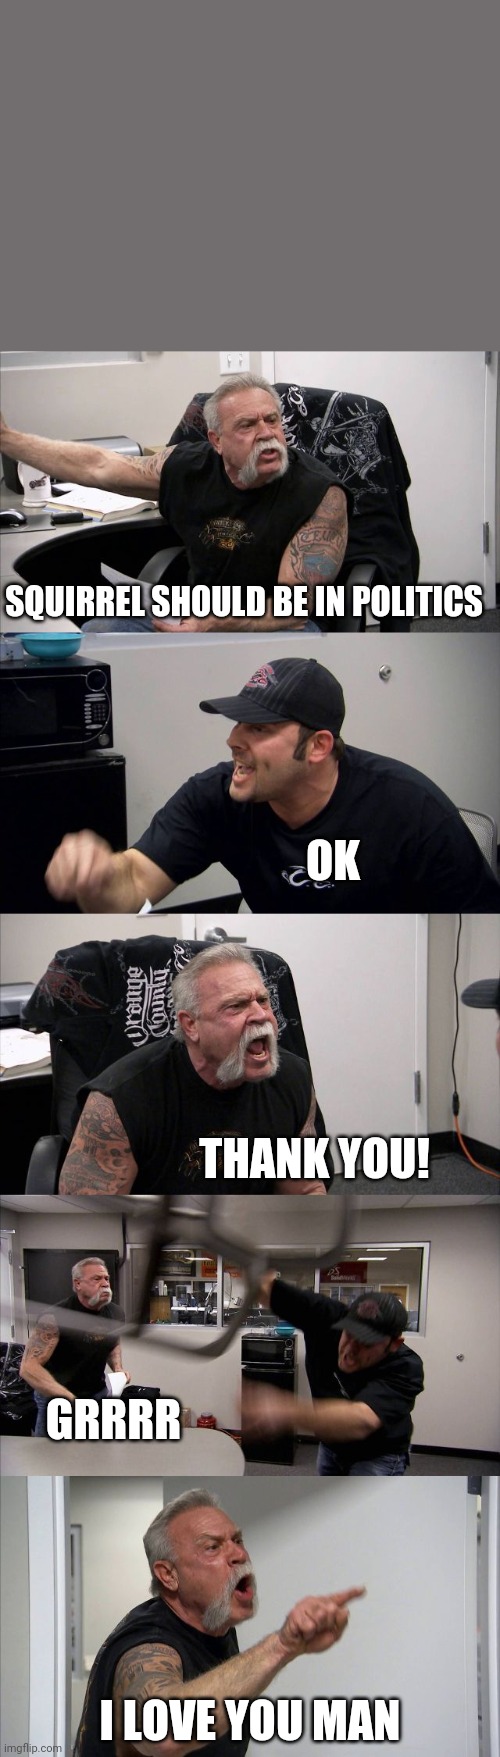 Love you man<3 | SQUIRREL SHOULD BE IN POLITICS; OK; THANK YOU! GRRRR; I LOVE YOU MAN | image tagged in memes,american chopper argument,squirrel,politics,squirrel politics,funny | made w/ Imgflip meme maker